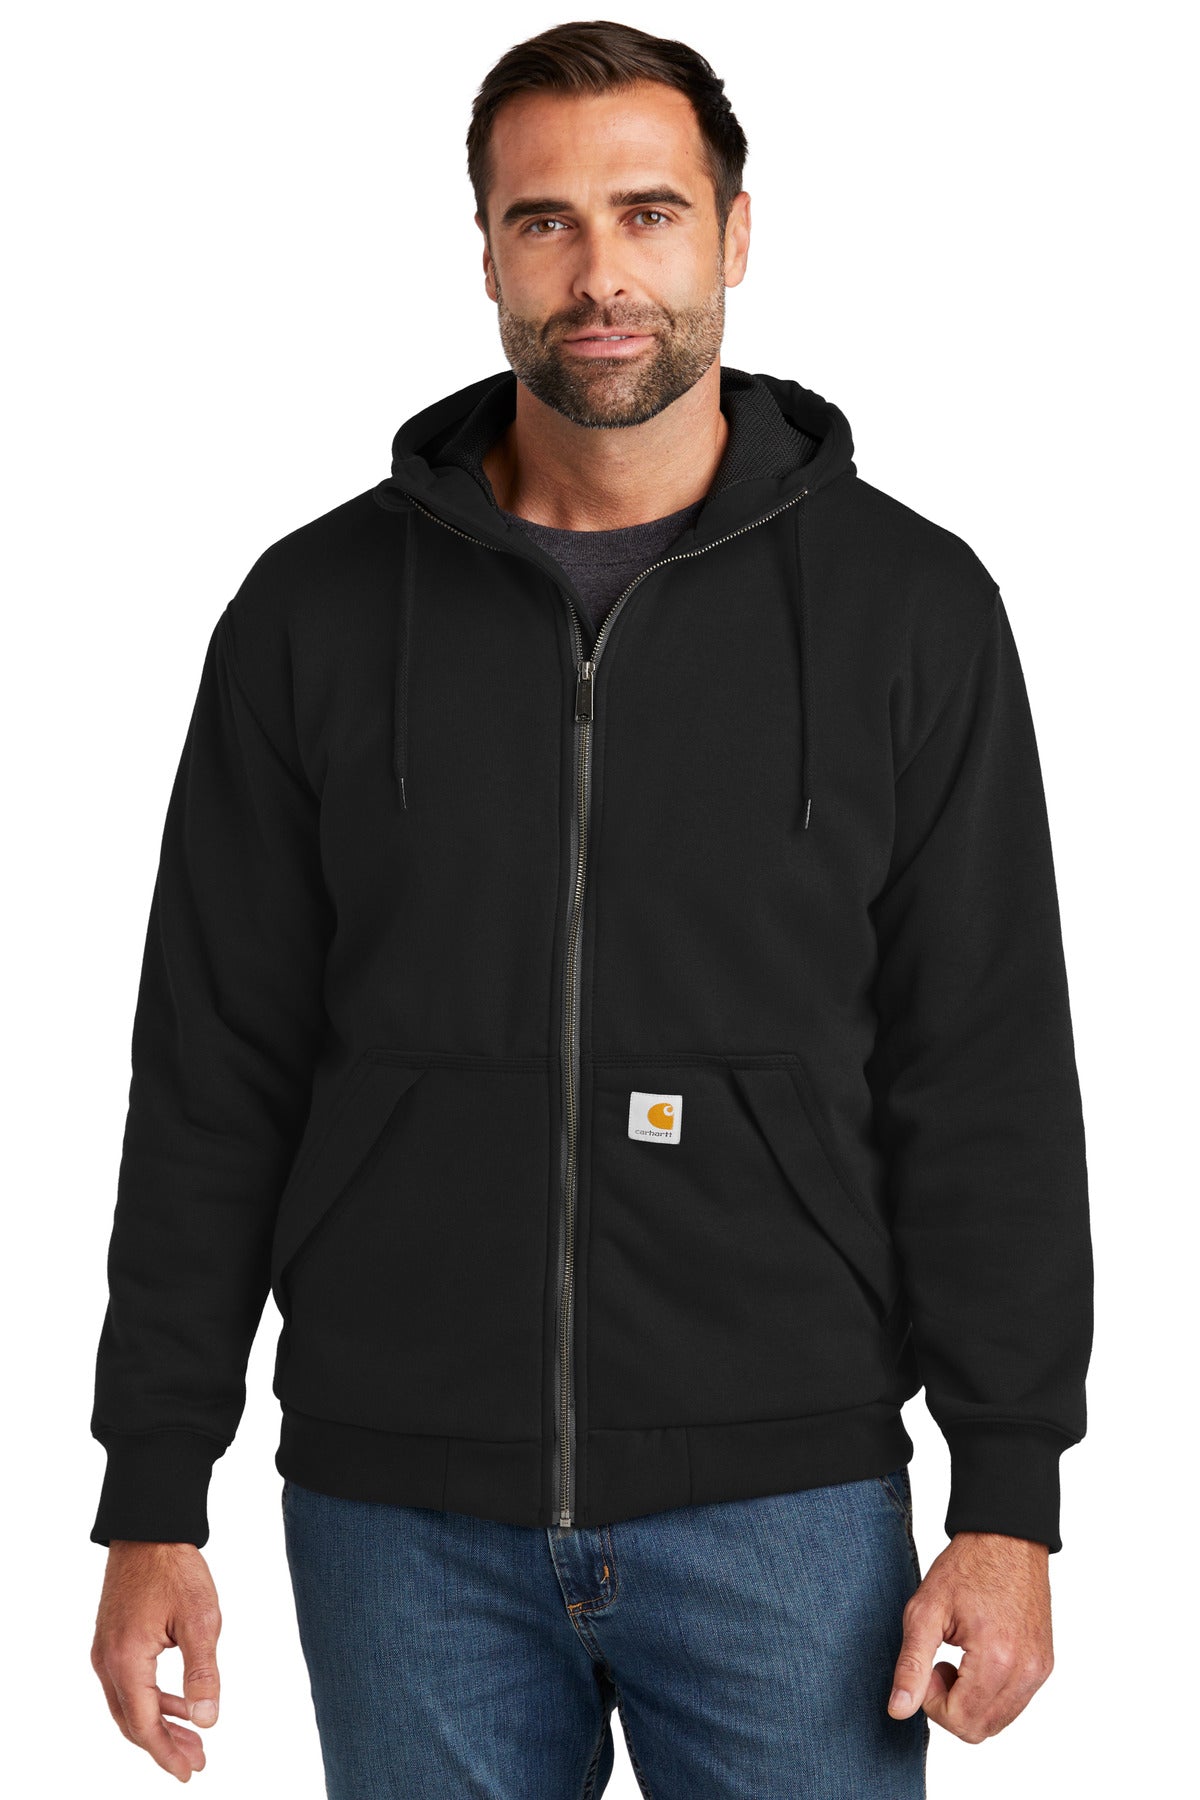 Carhartt® Midweight Thermal-Lined Full-Zip Sweatshirt CT104078 - DFW Impression